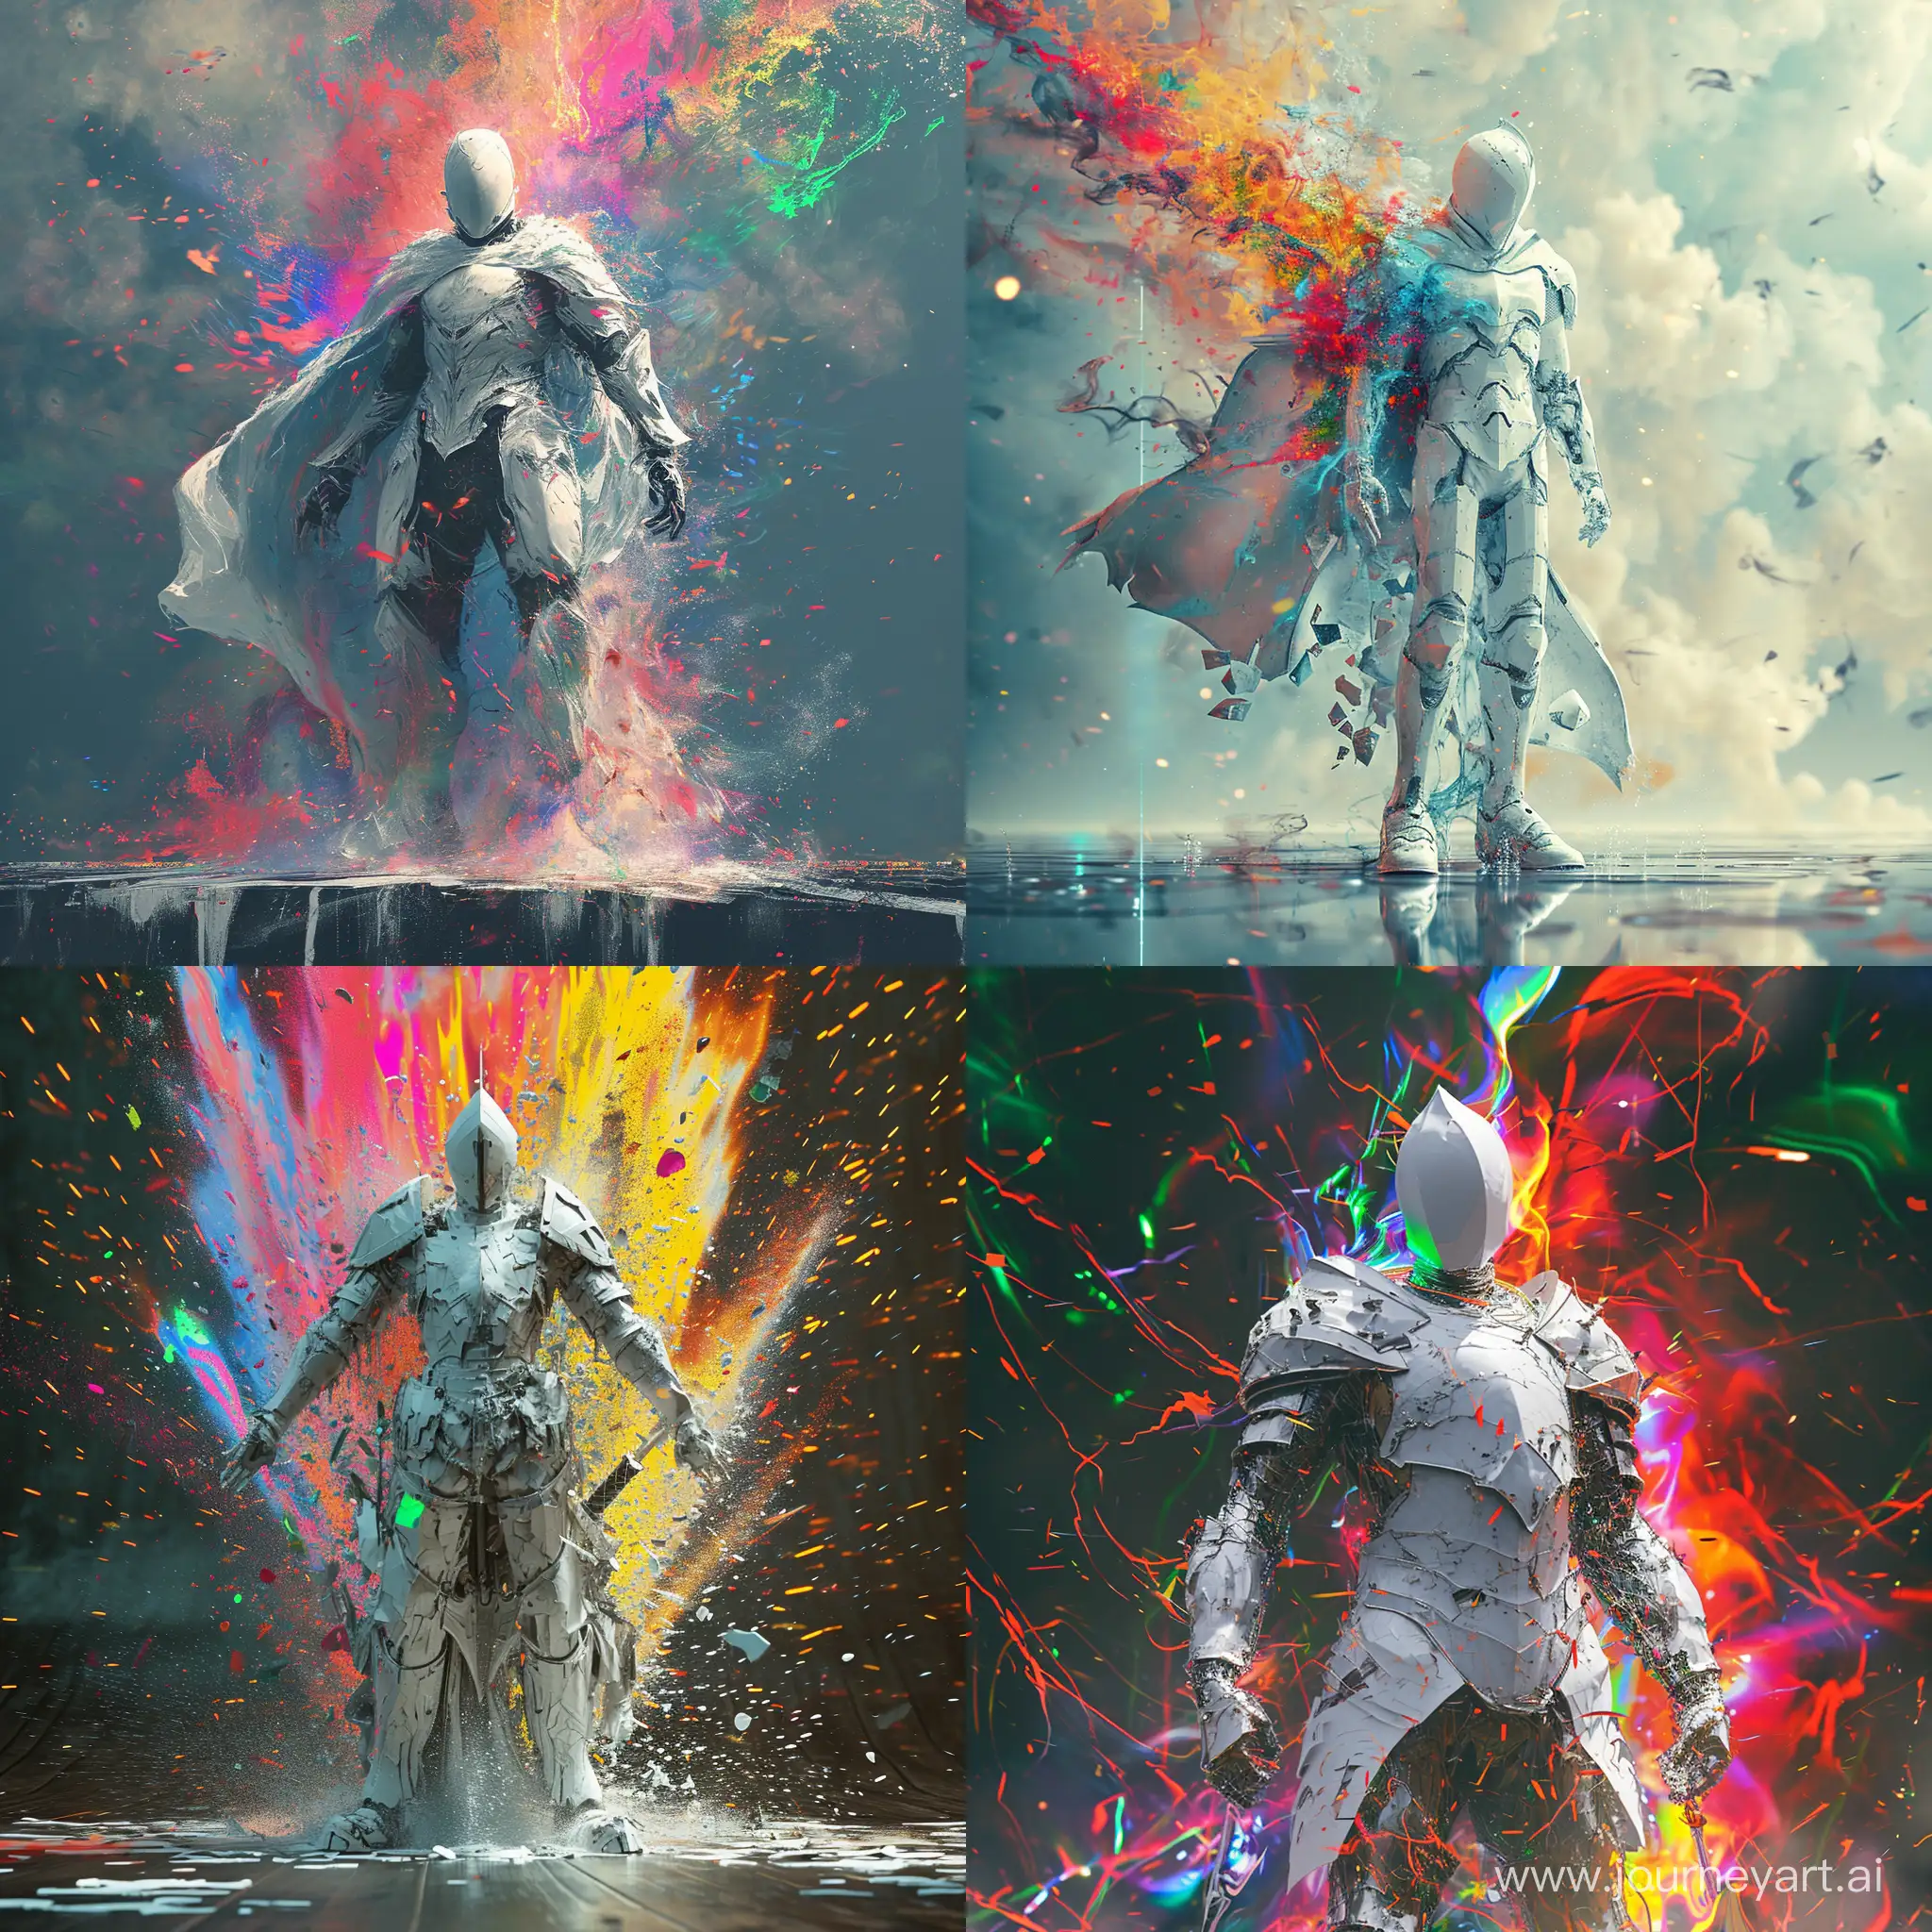 Futuristic-Cyberpunk-White-Knight-in-Explosive-Colorful-Abstraction